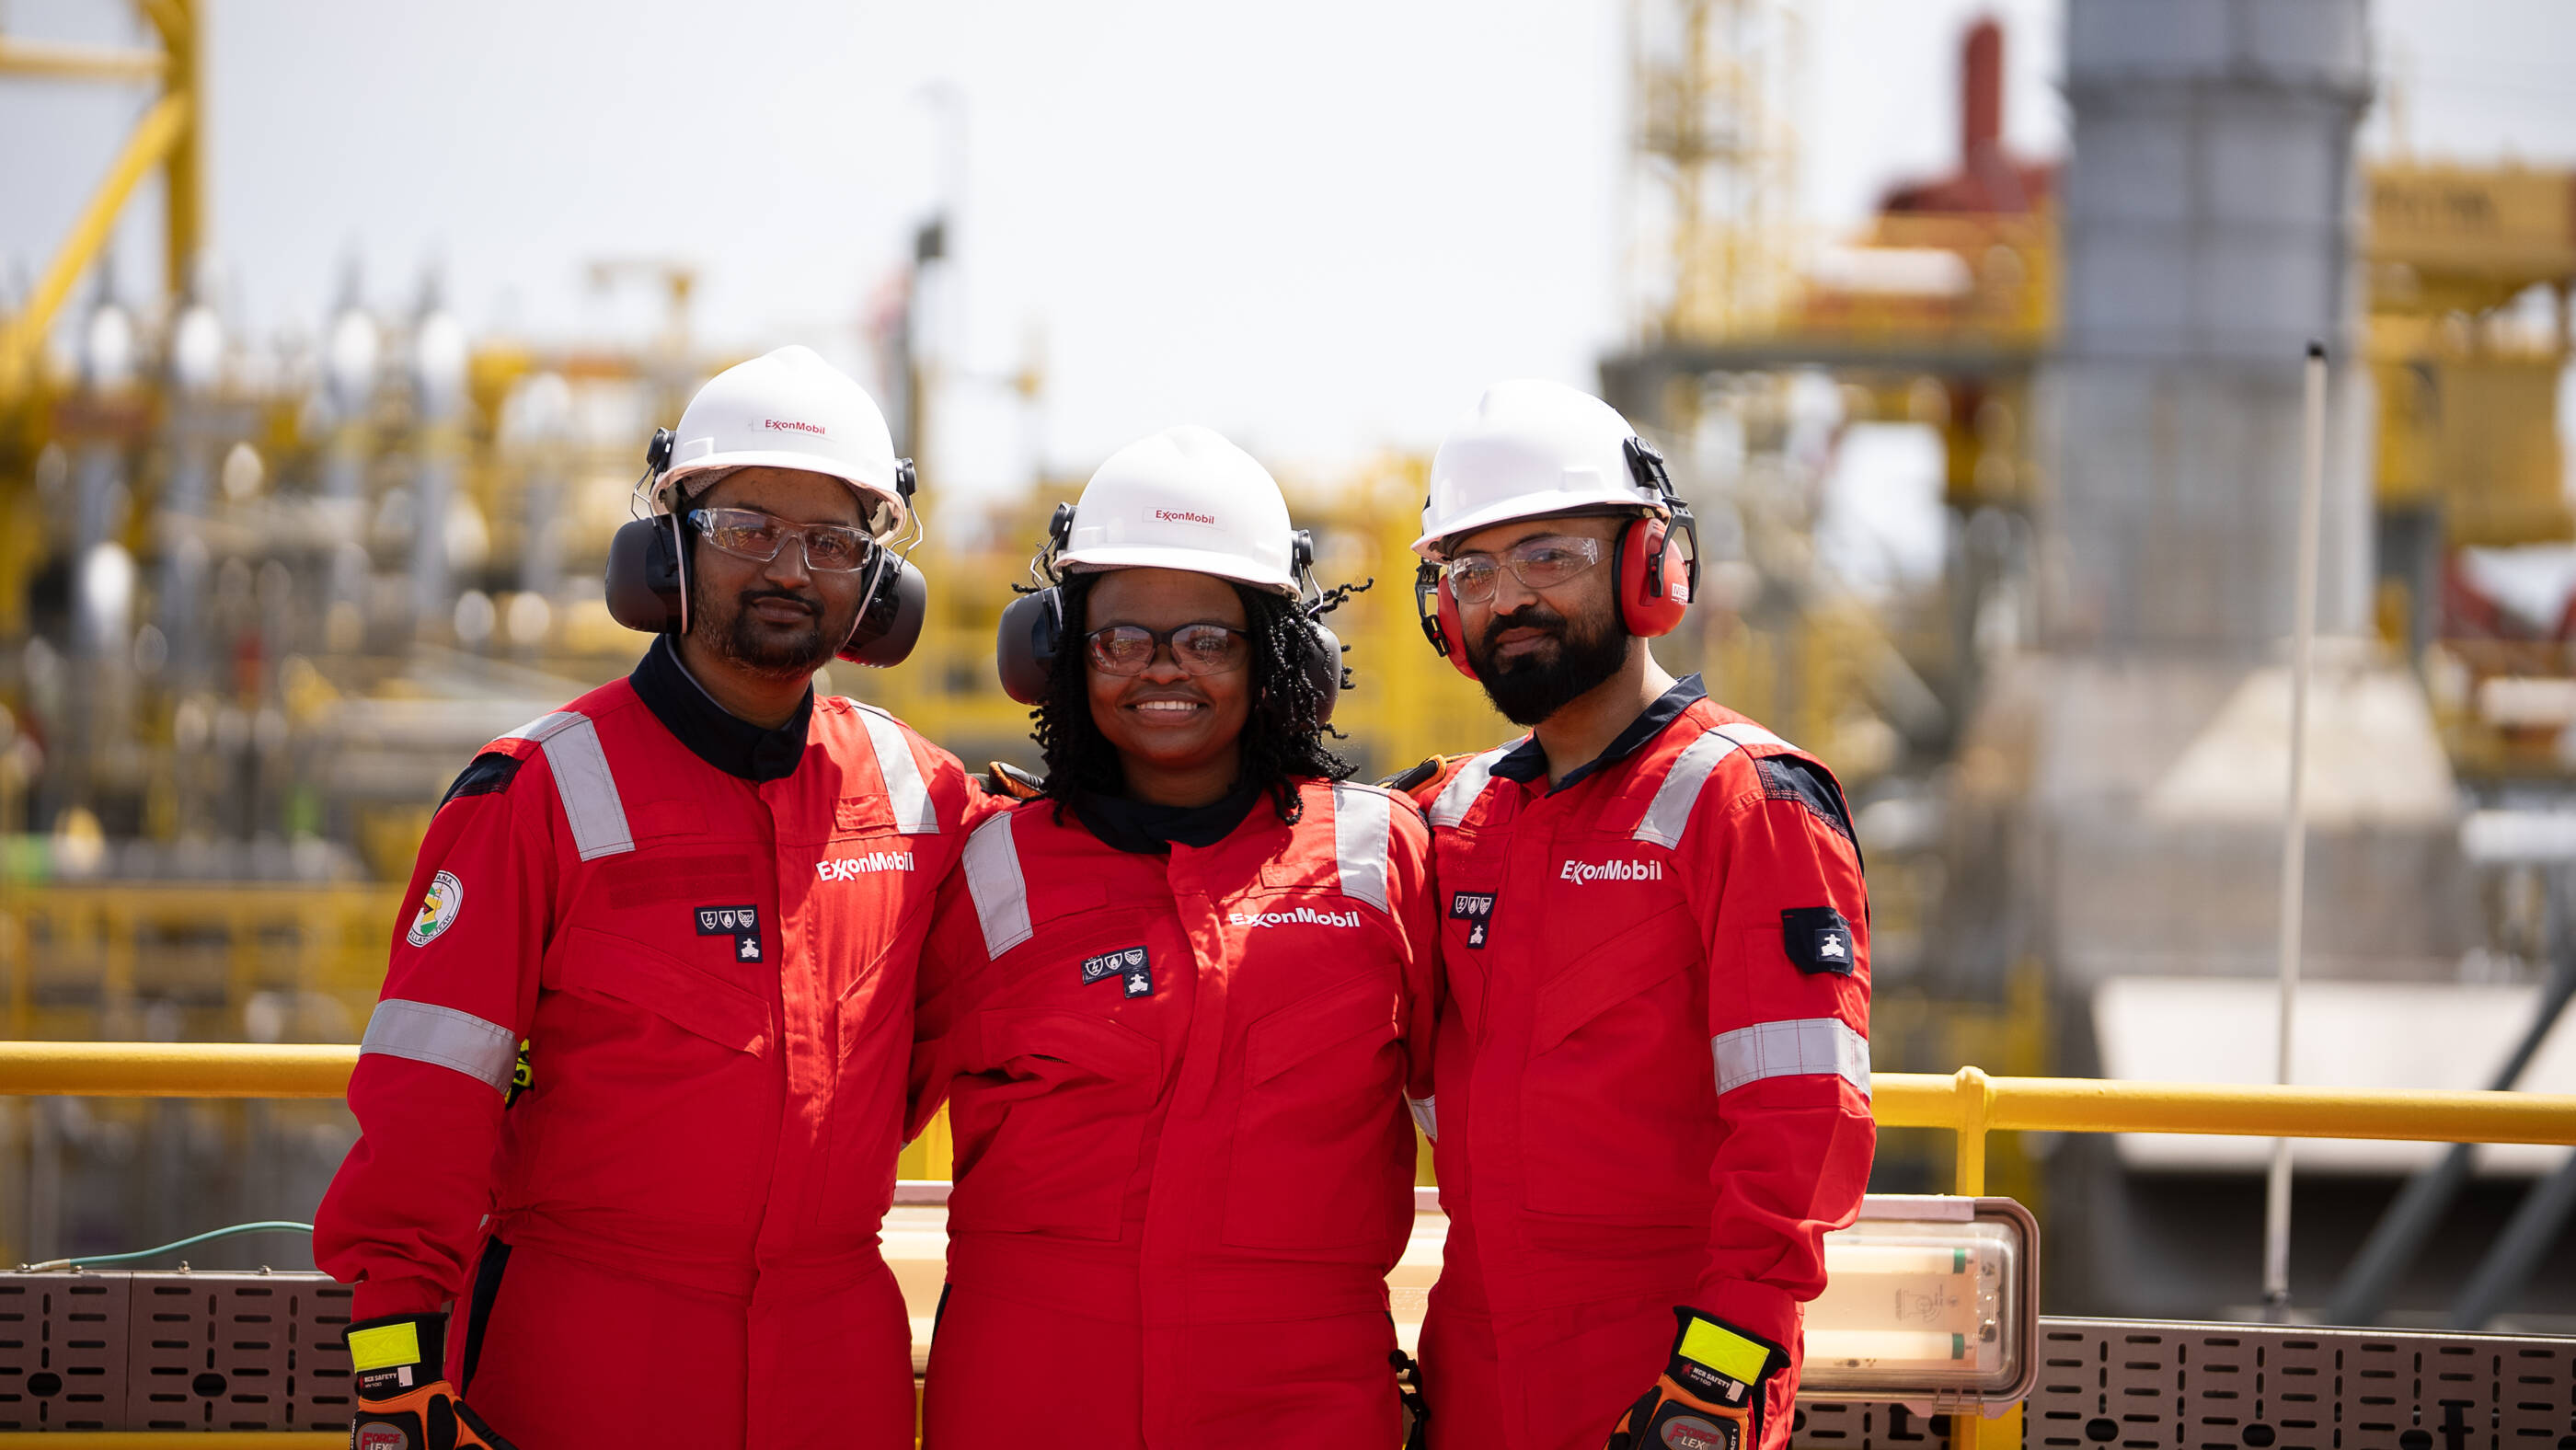 ExxonMobil's primary responsibility is to produce the energy and products the world needs in a responsible manner. Learn more about ExxonMobil and sustainability.